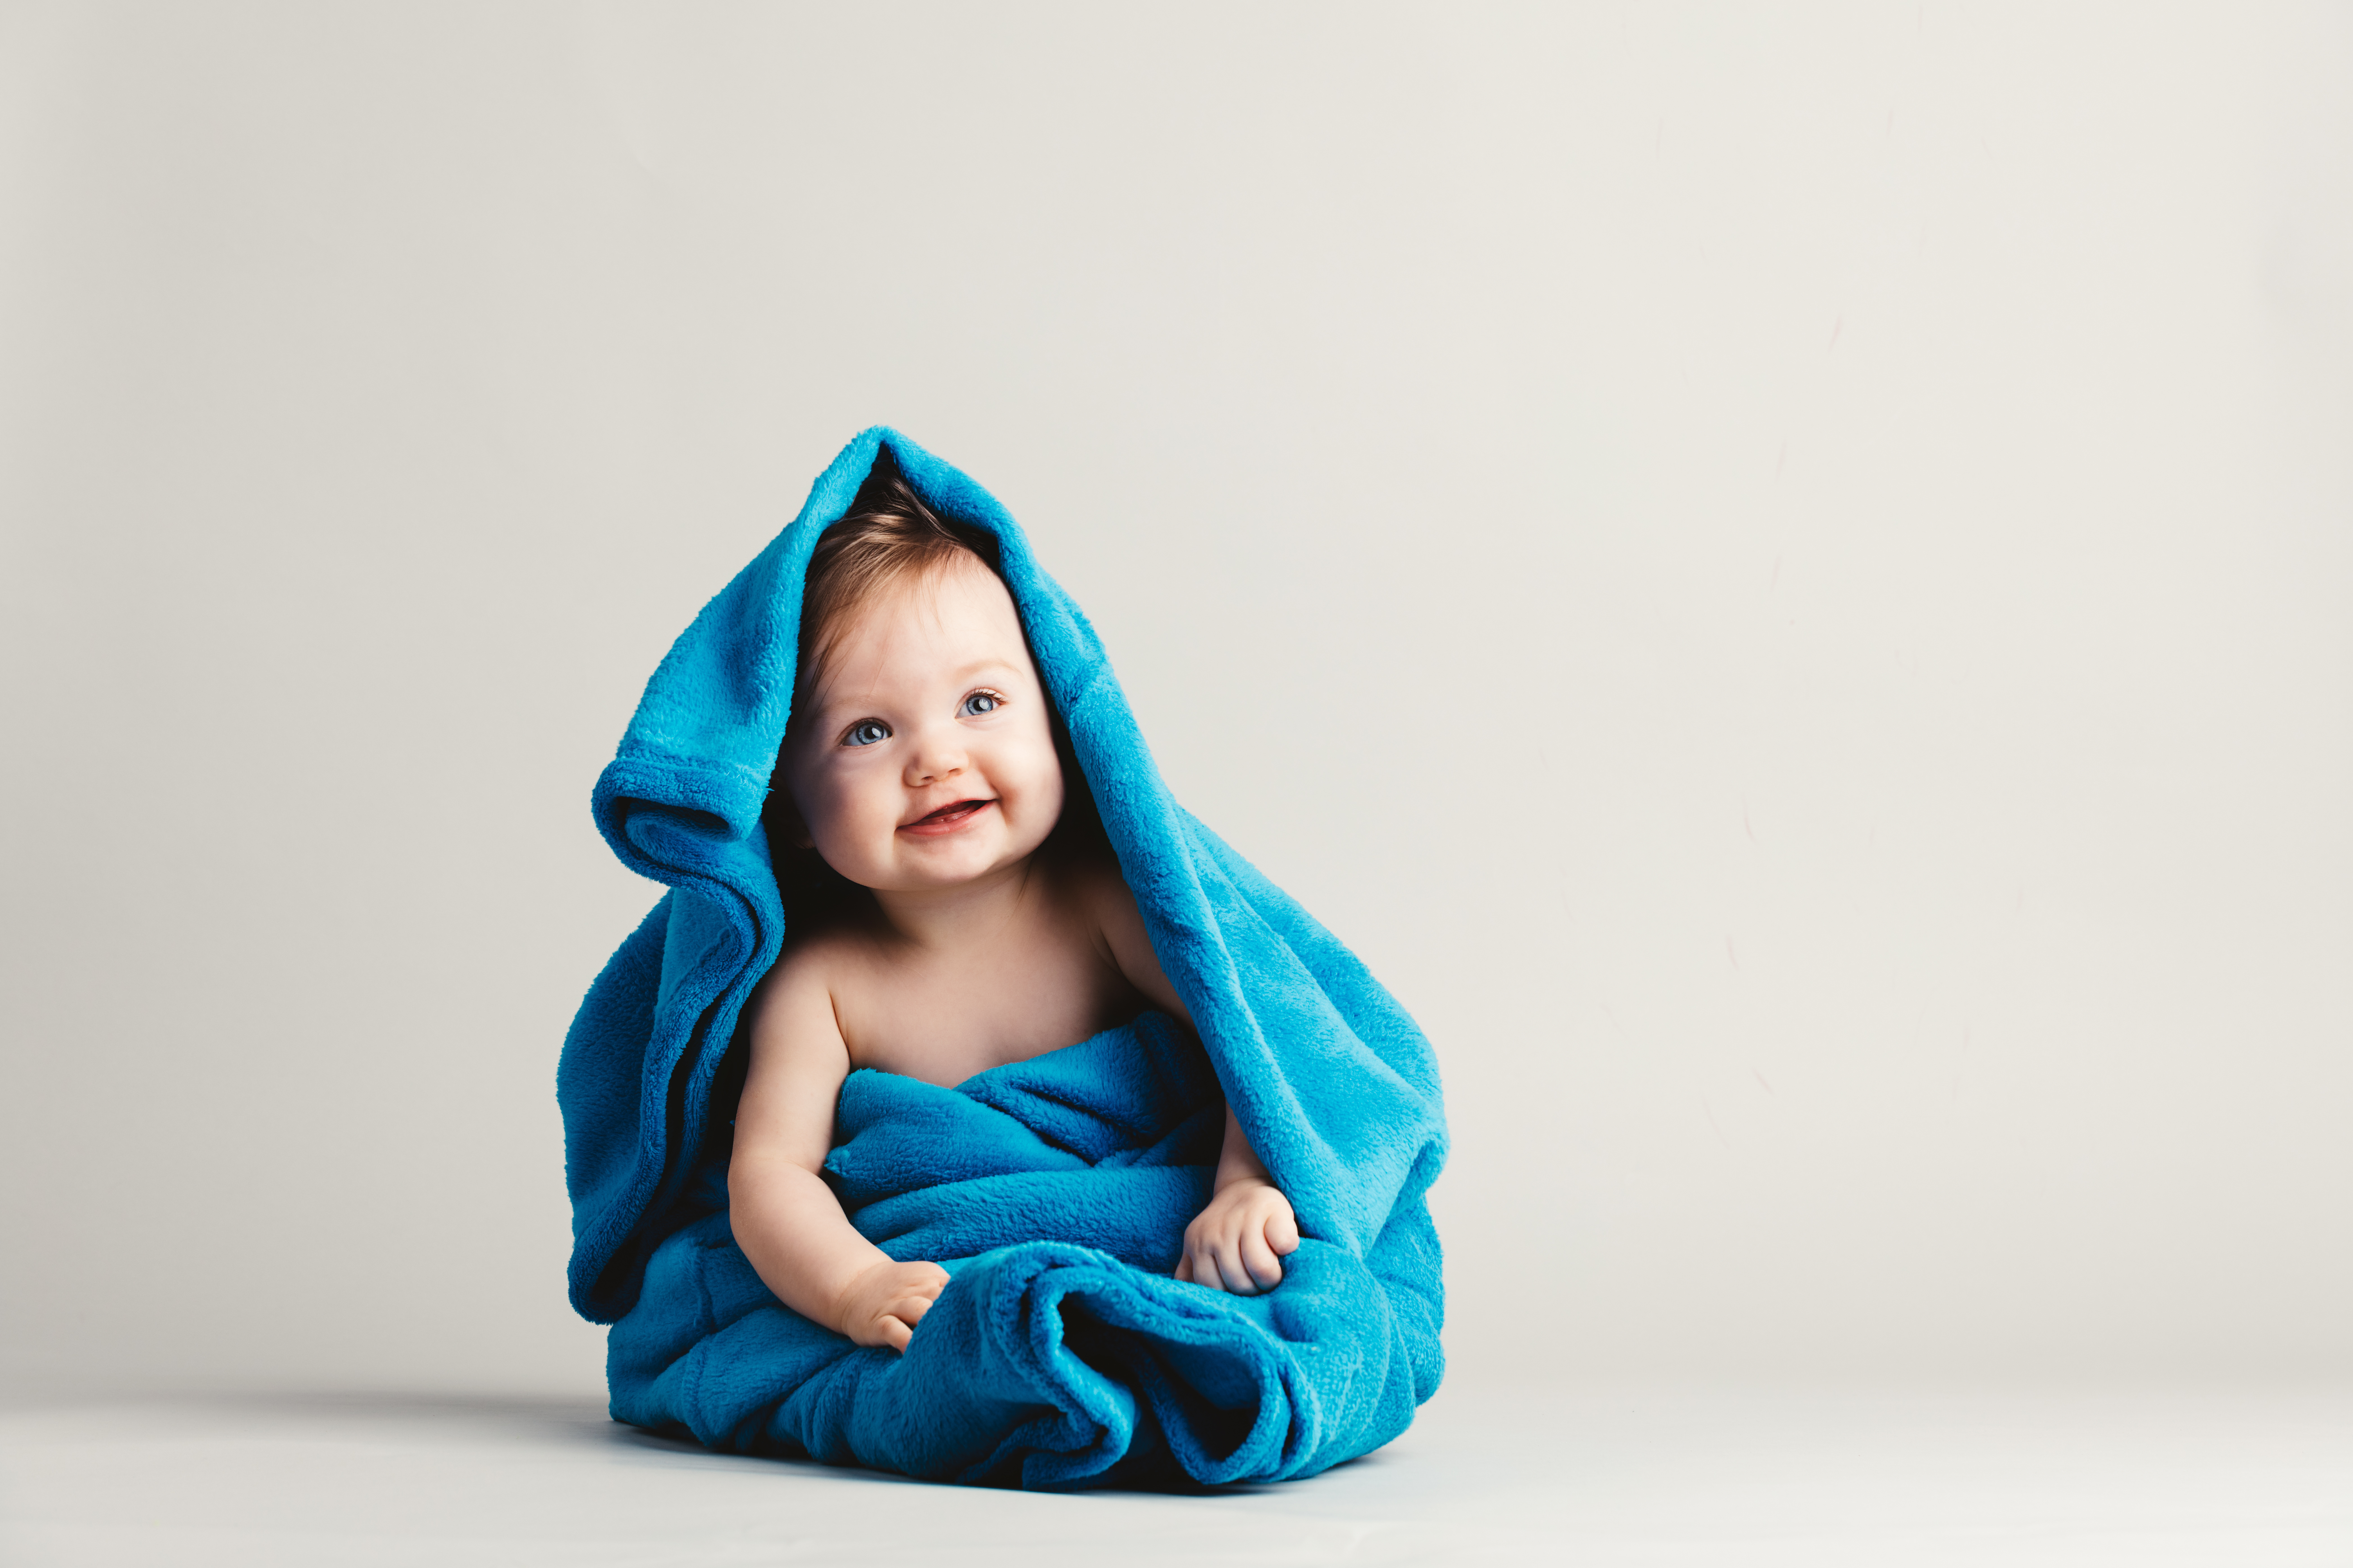 White backdrop with a blue towl wrapped around a smiling baby that has blue eyes.